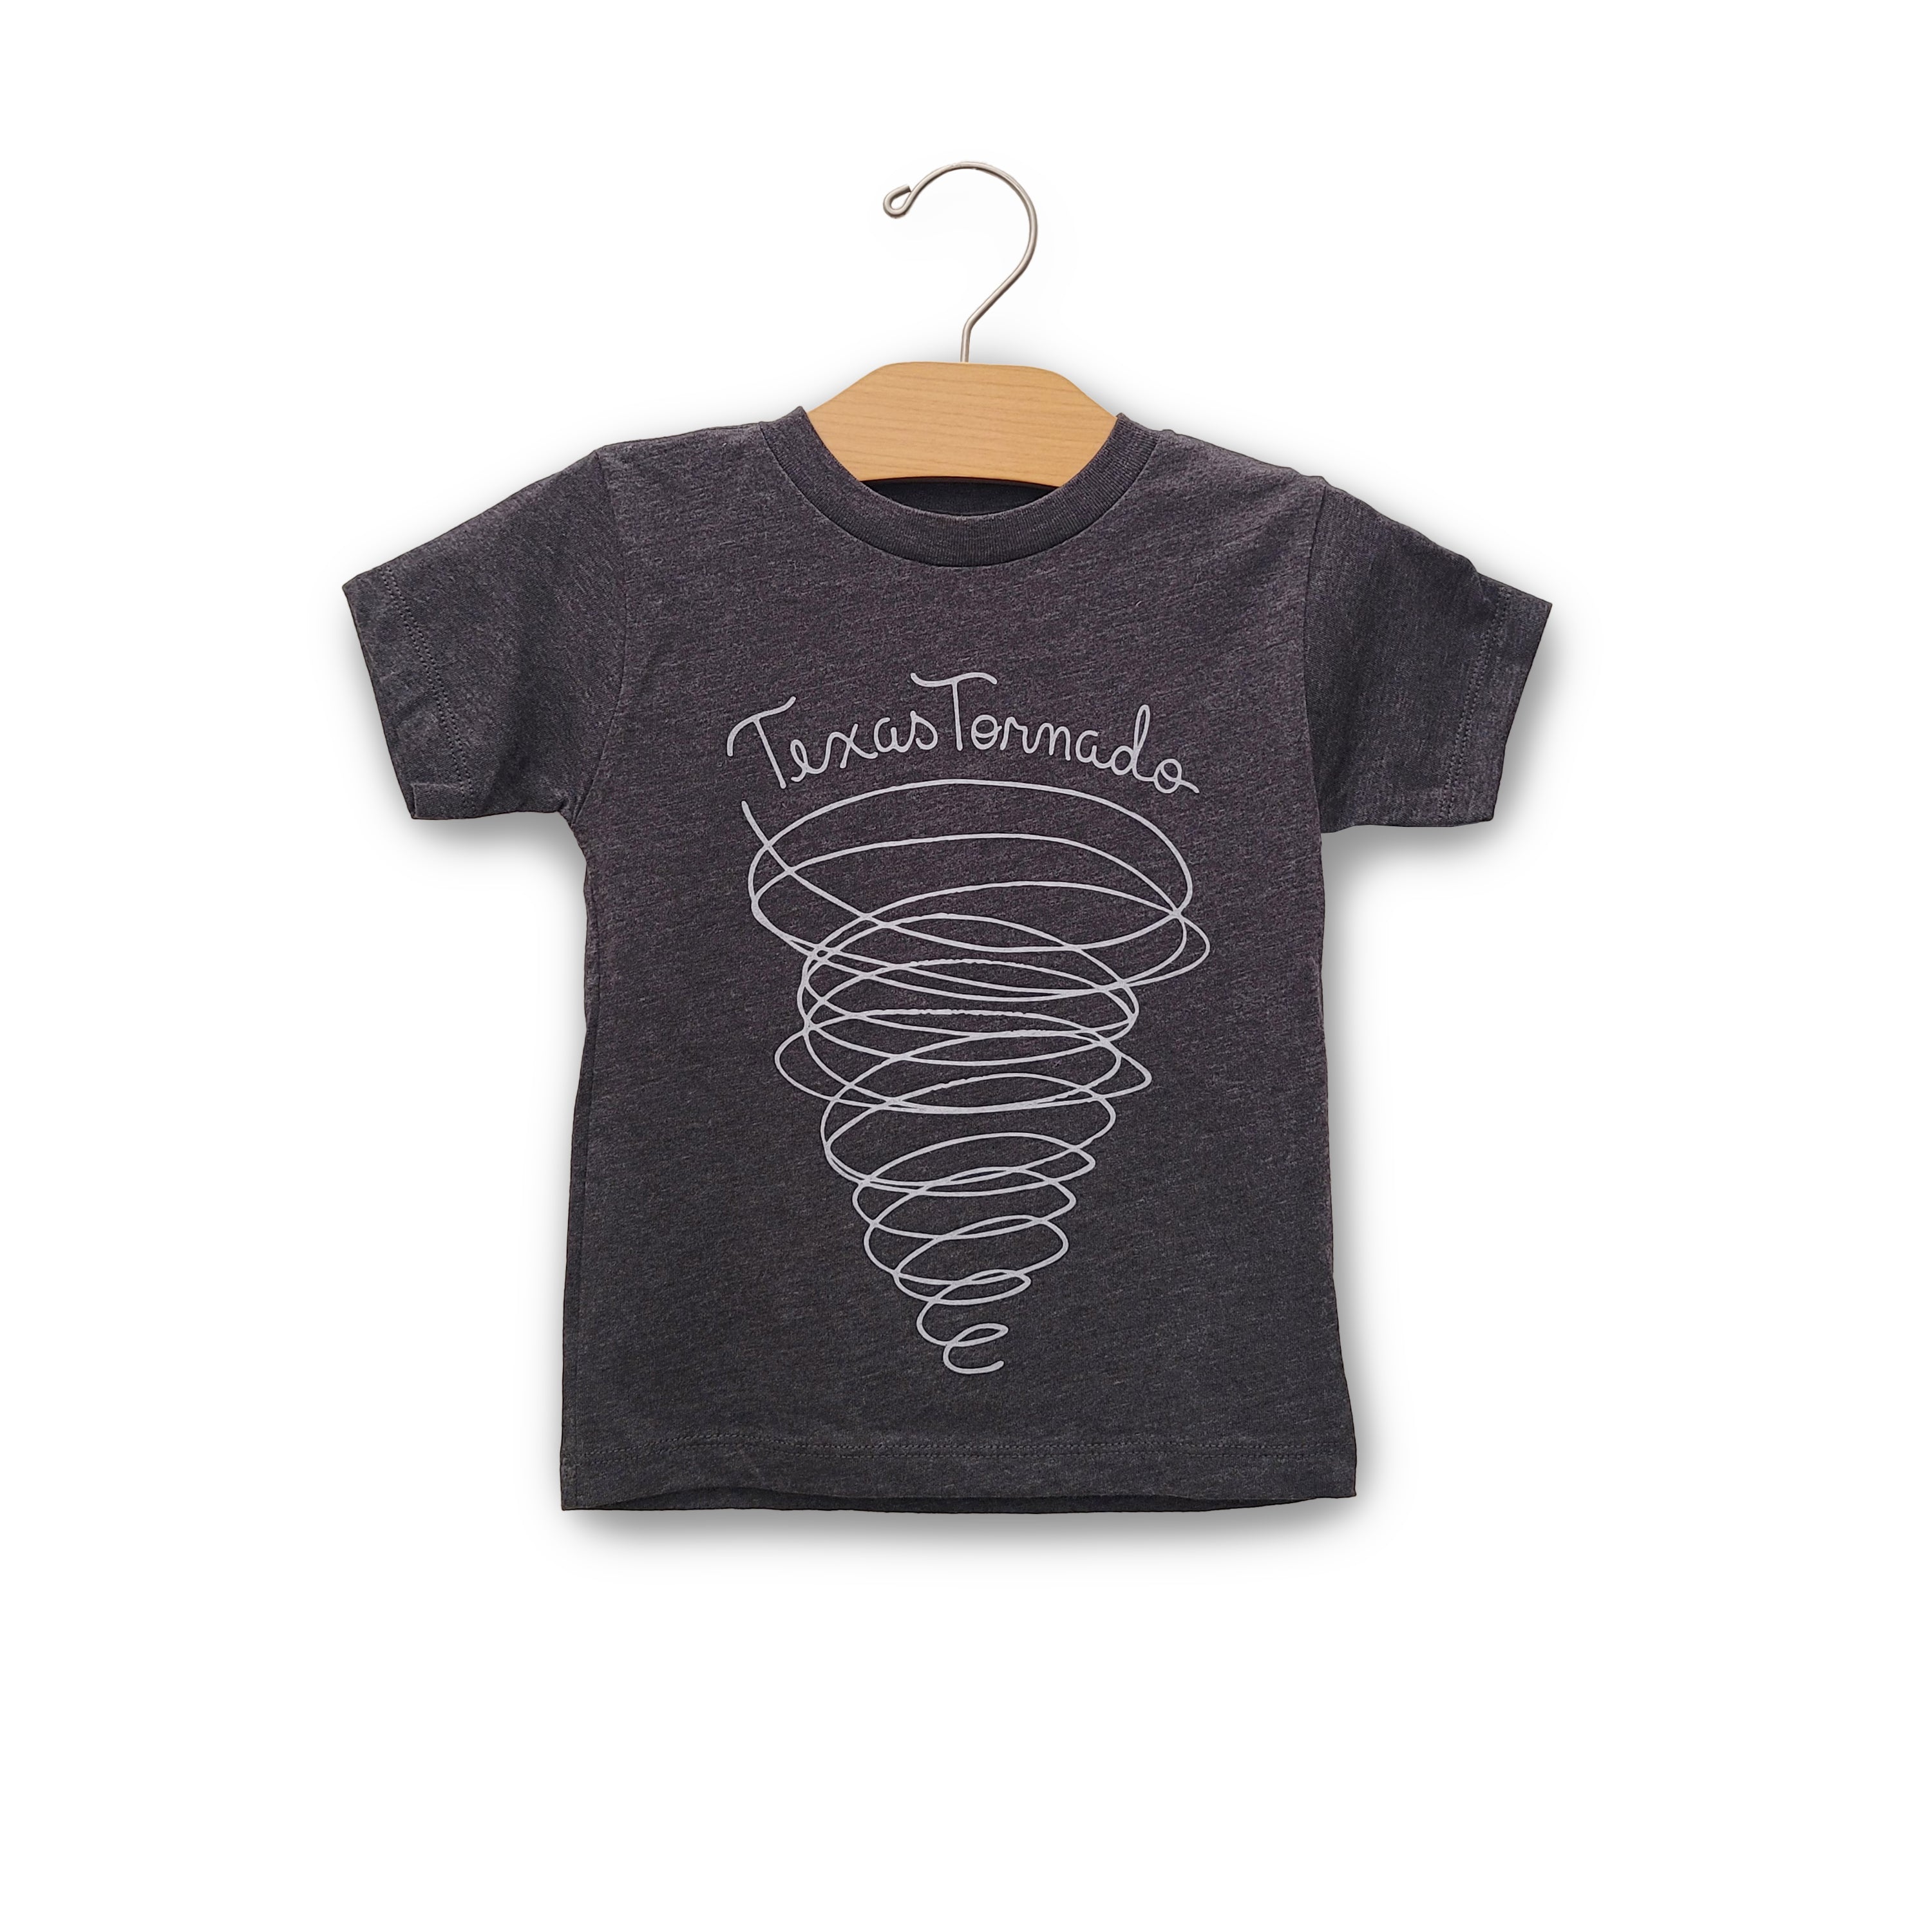 Toddler Texas Tornado Tee by River Road Clothing